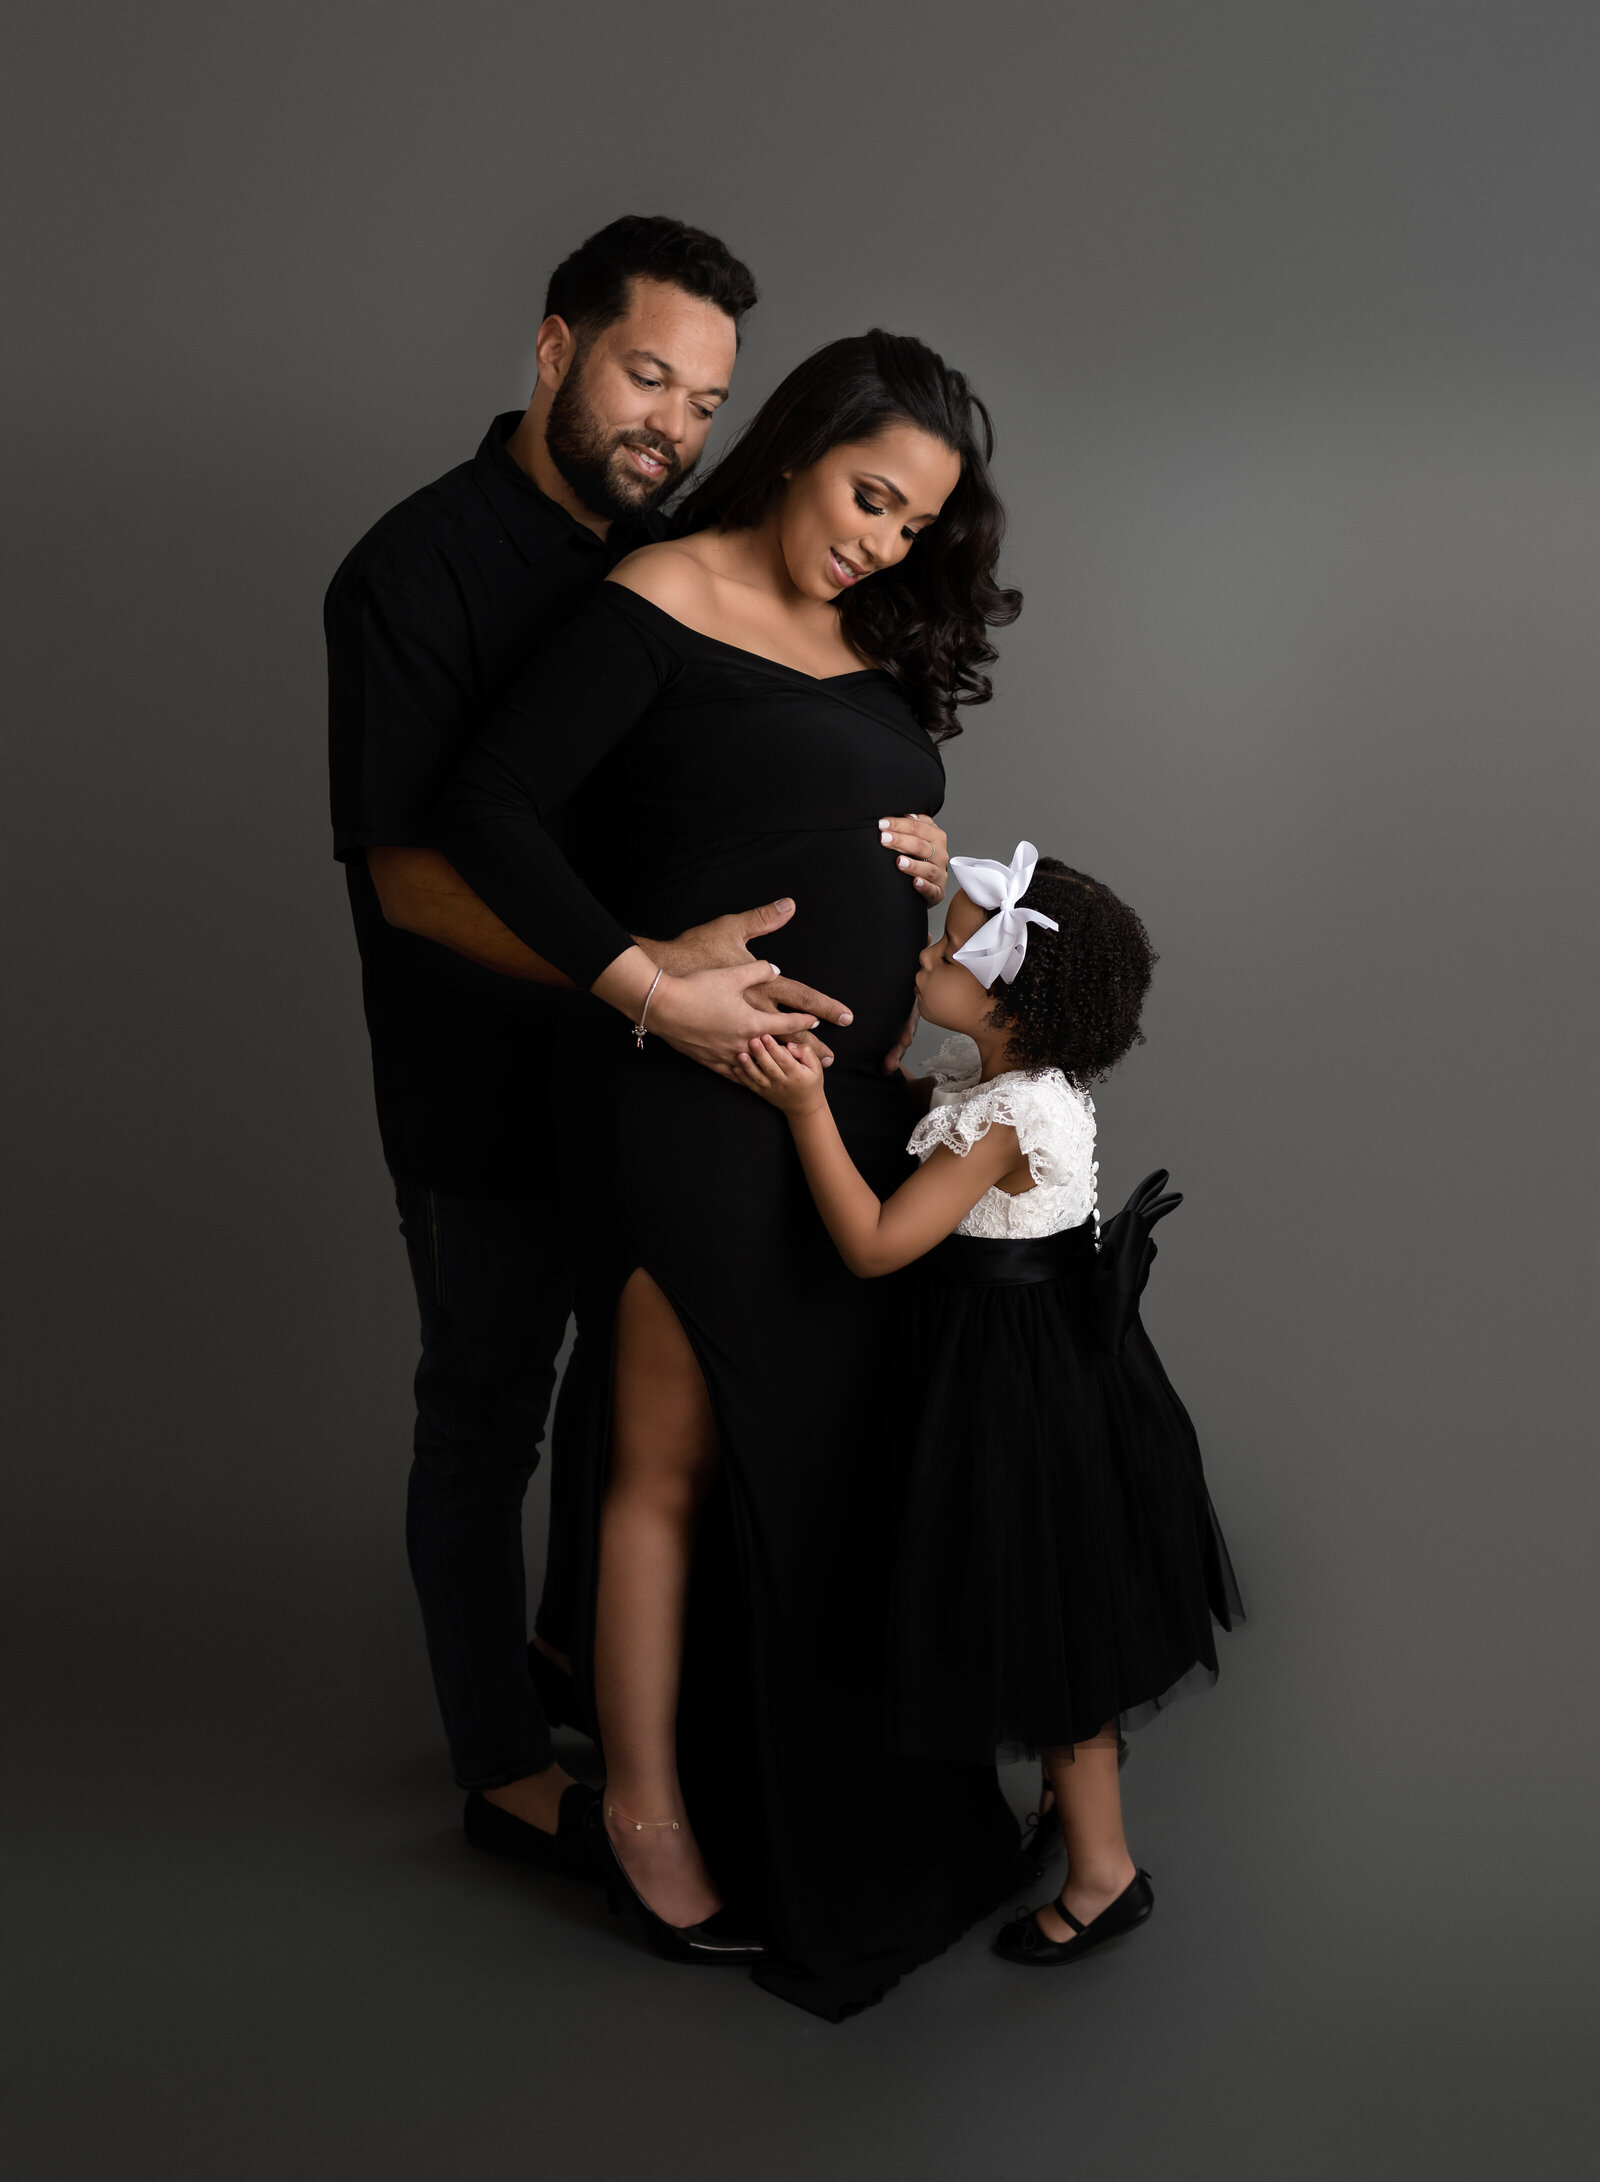 maternity and newborn photography packages near me